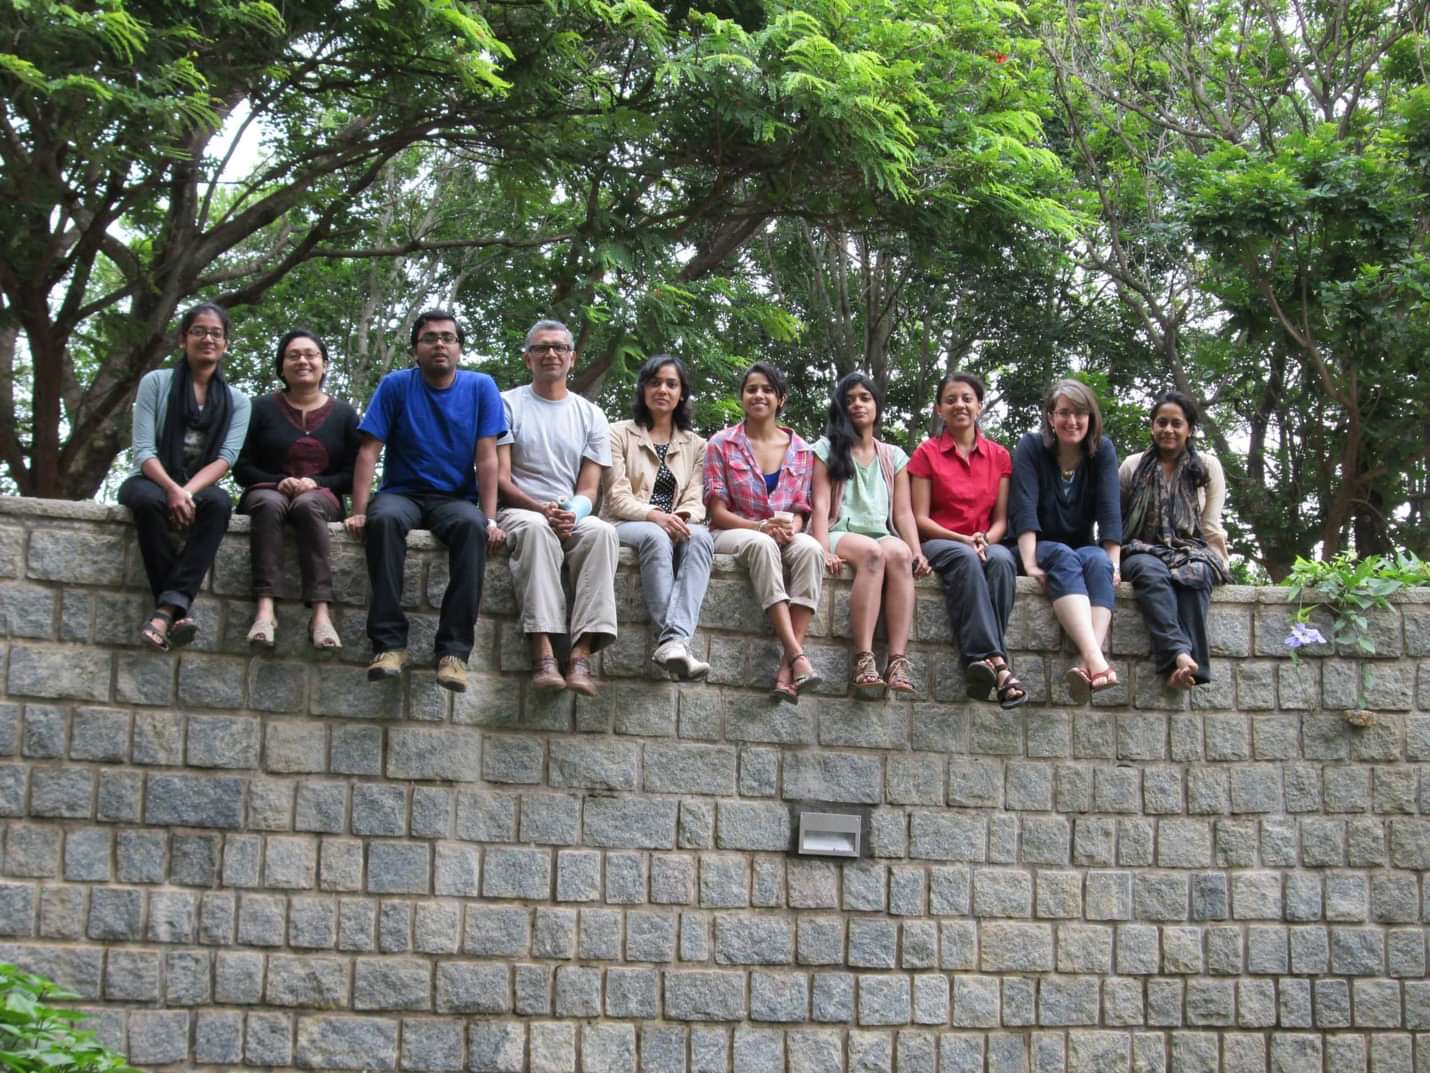 class of 2013, Anil Ananthaswamy is seen fourth from left and author Shreya Dasgupta third from the right.